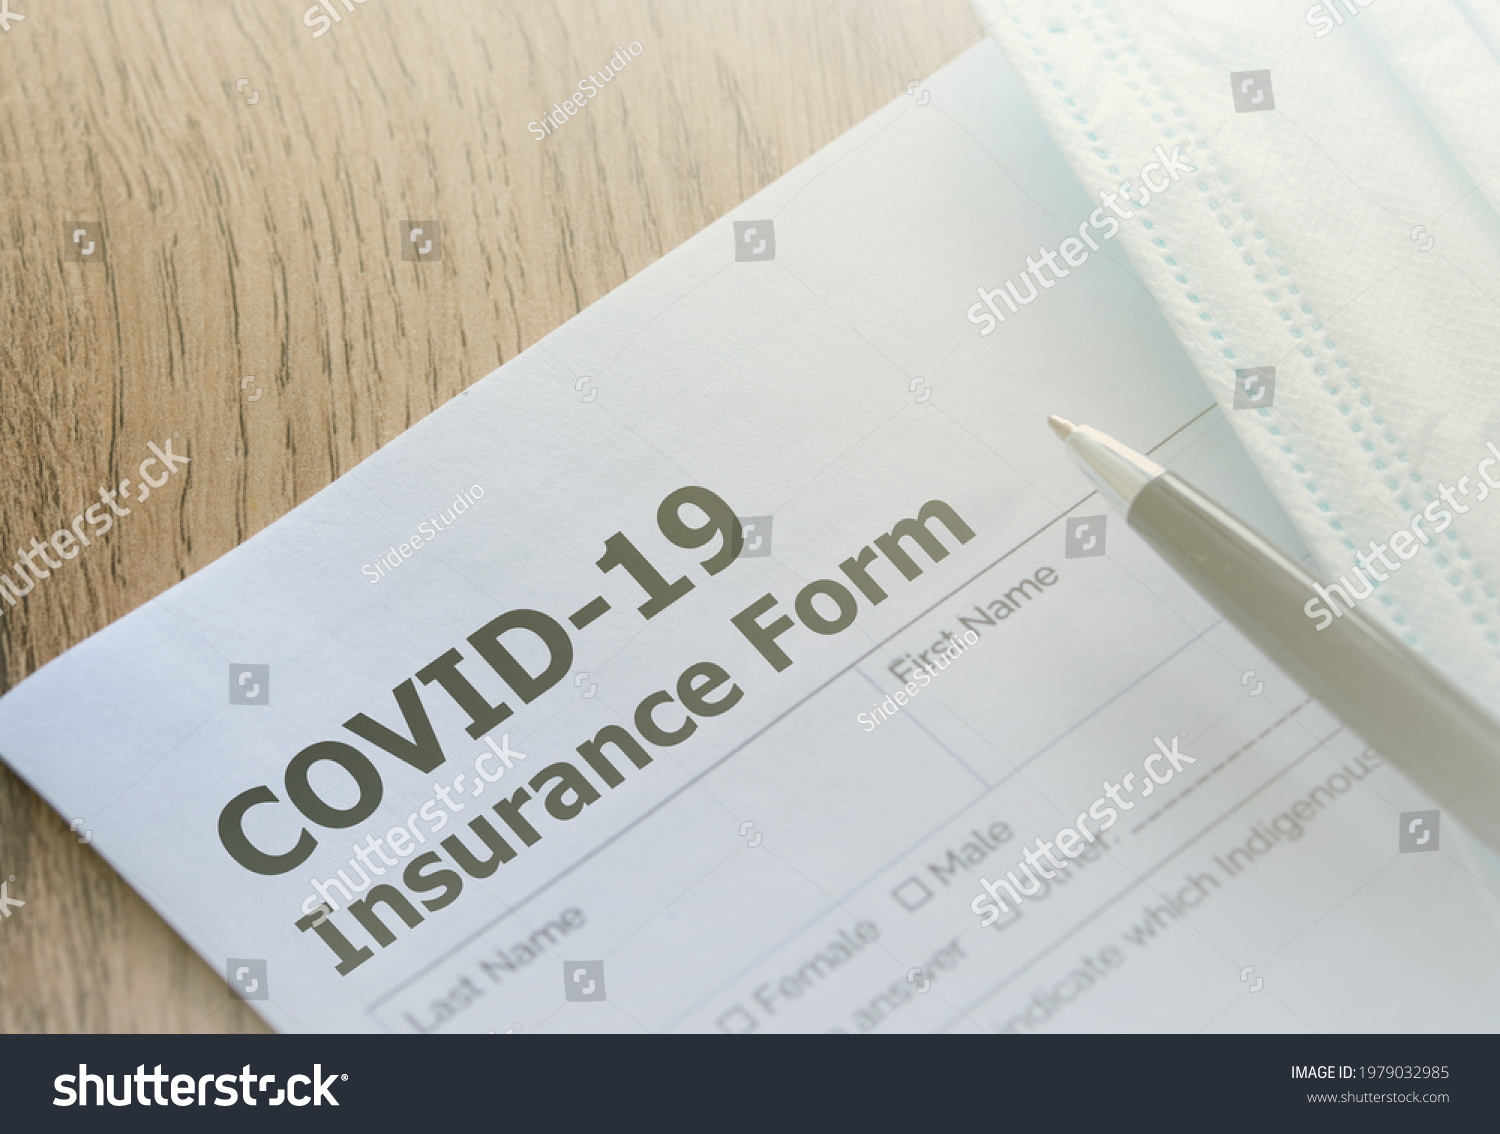 COVID-19 Health insurance paper form with a pen and medical mask on wooden table. Health insurance concept.  #1979032985